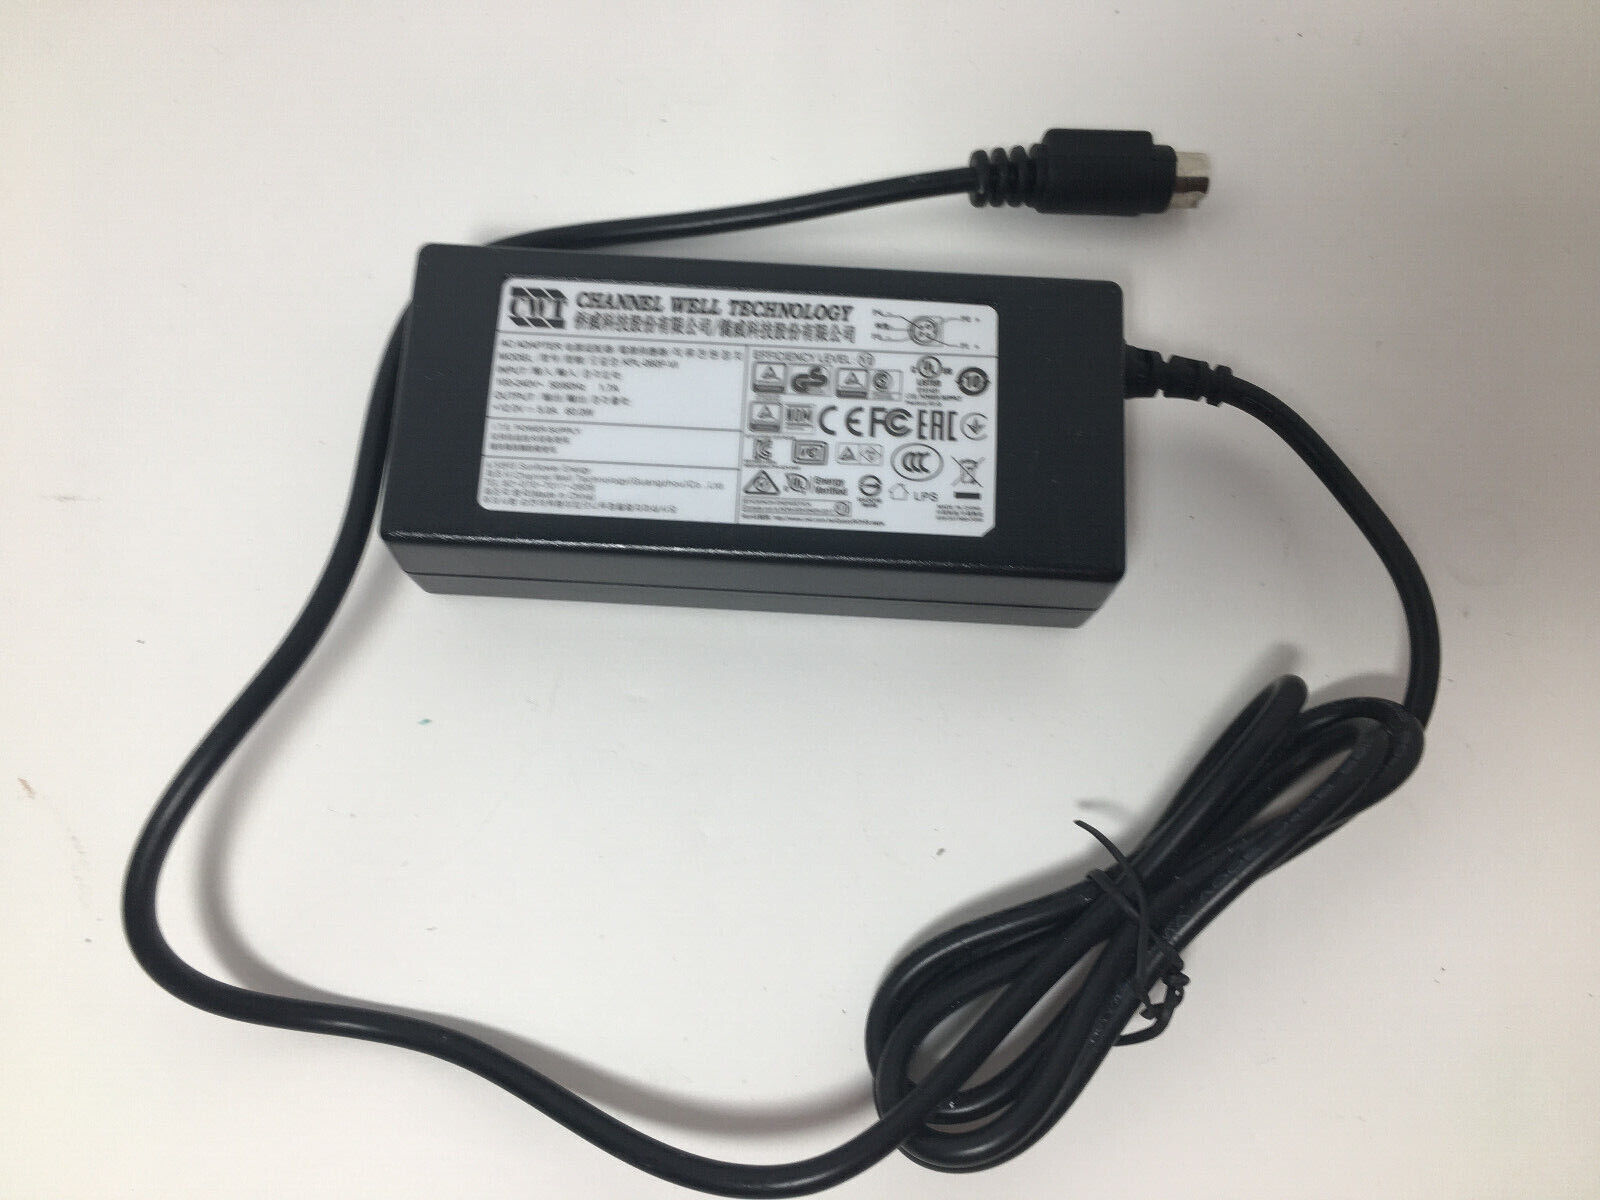 *Brand NEW*Genuine KPL-060F-VI 12V 5A 60W 4-Pin CWT Channel Well Technology AC Adapter - Click Image to Close